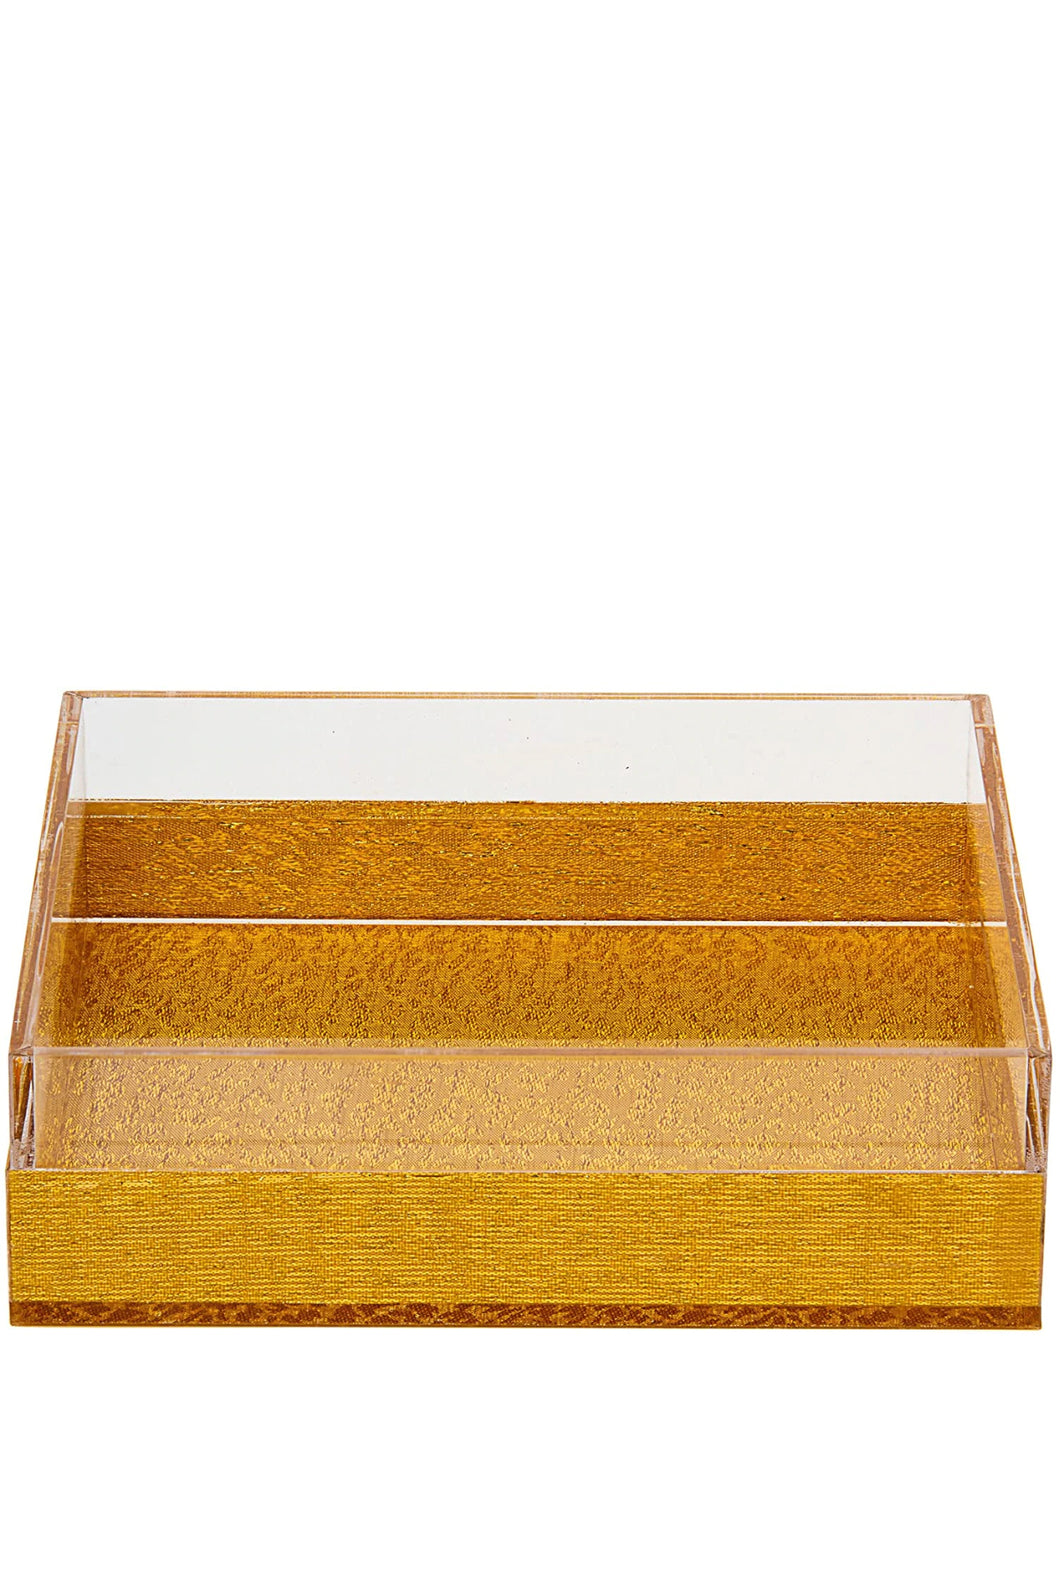 (D) Judaica Napkin Holder Lucite 8x8 inch For Table (Gold)